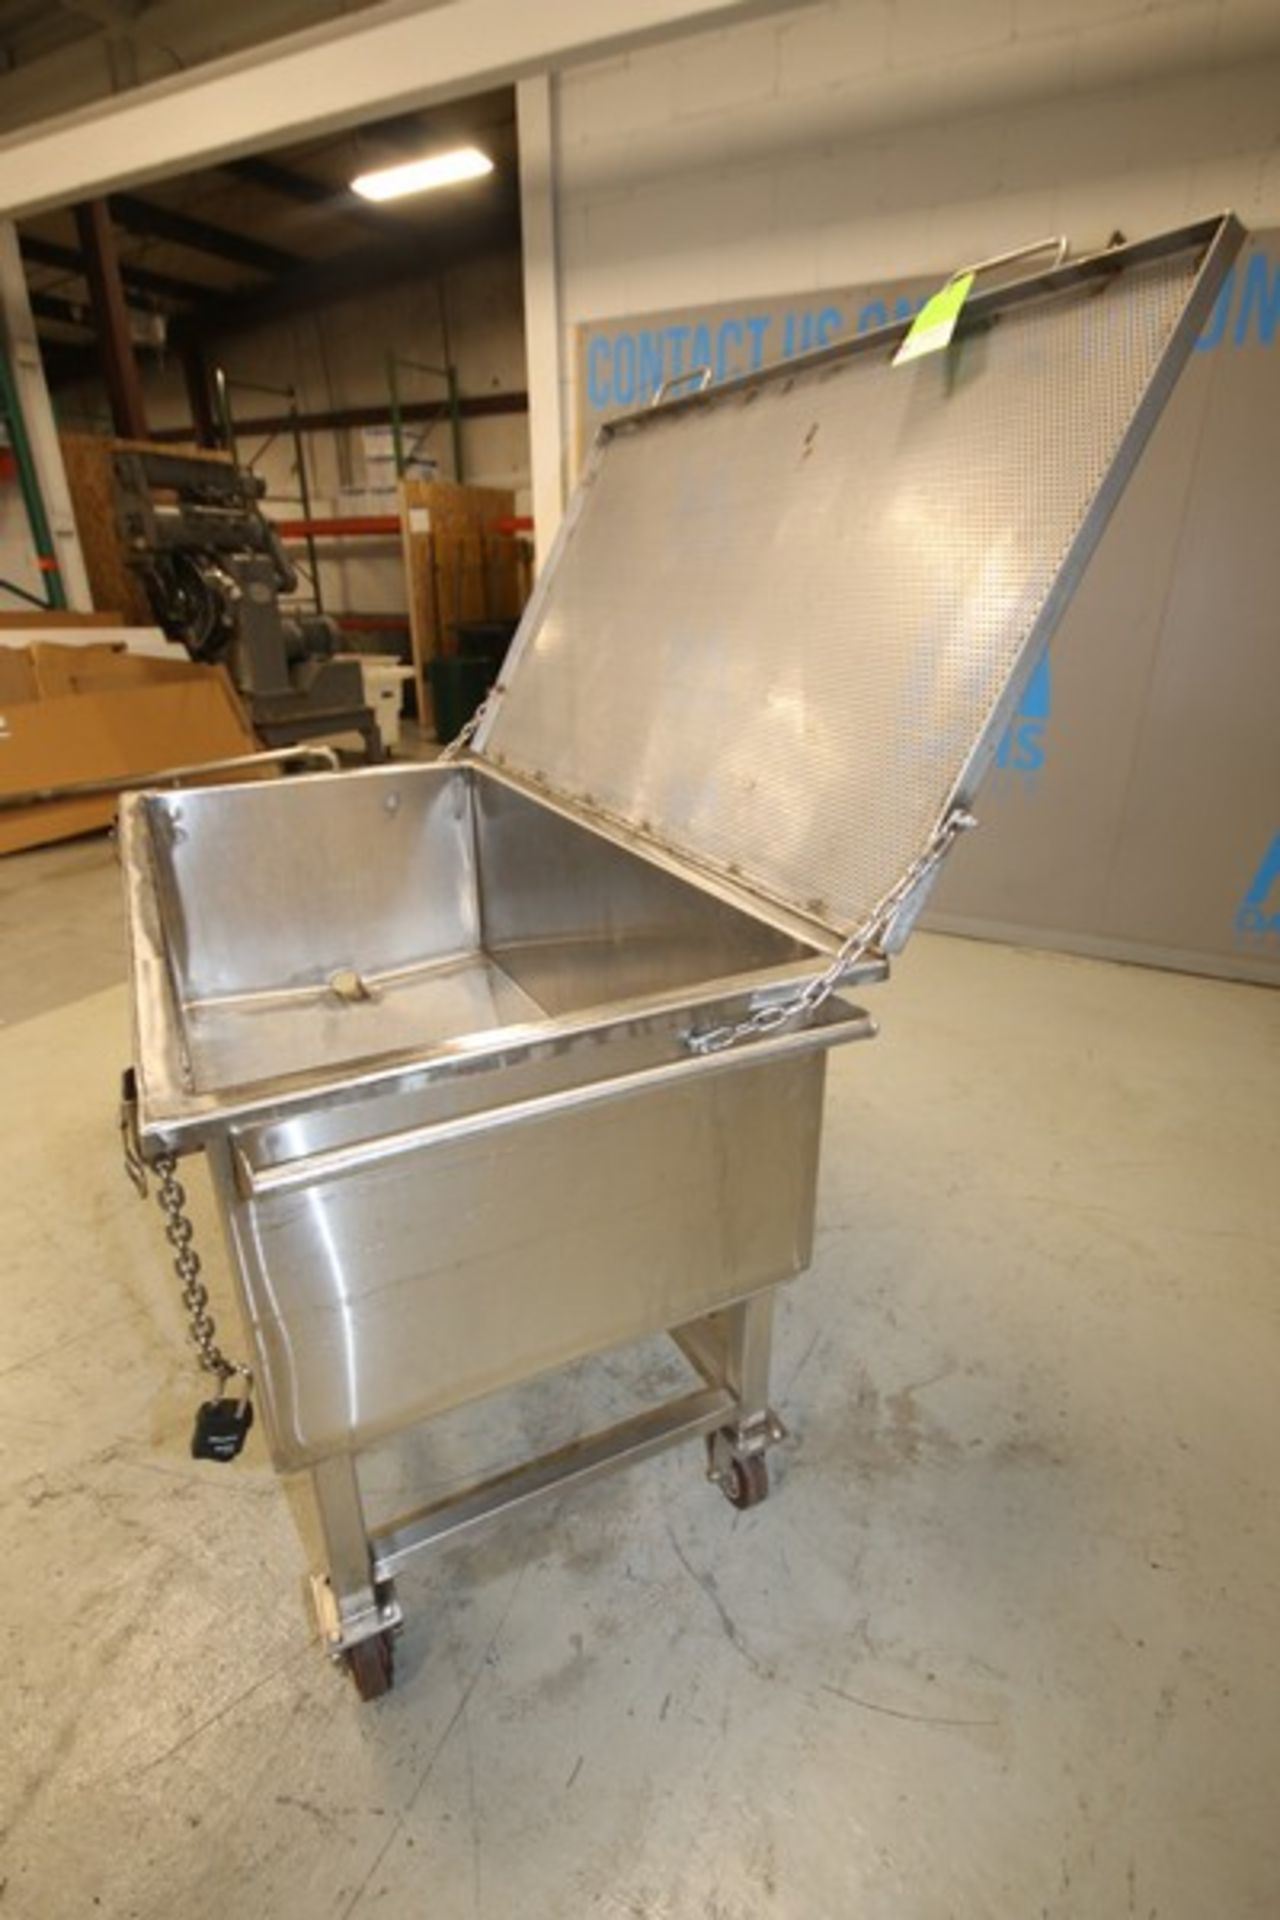 5' L x 30" W x 20" D S/S Portable Tank with Hinged Lid, 3" CT Drain (INV#92814) (Located @ the MDG - Image 5 of 5